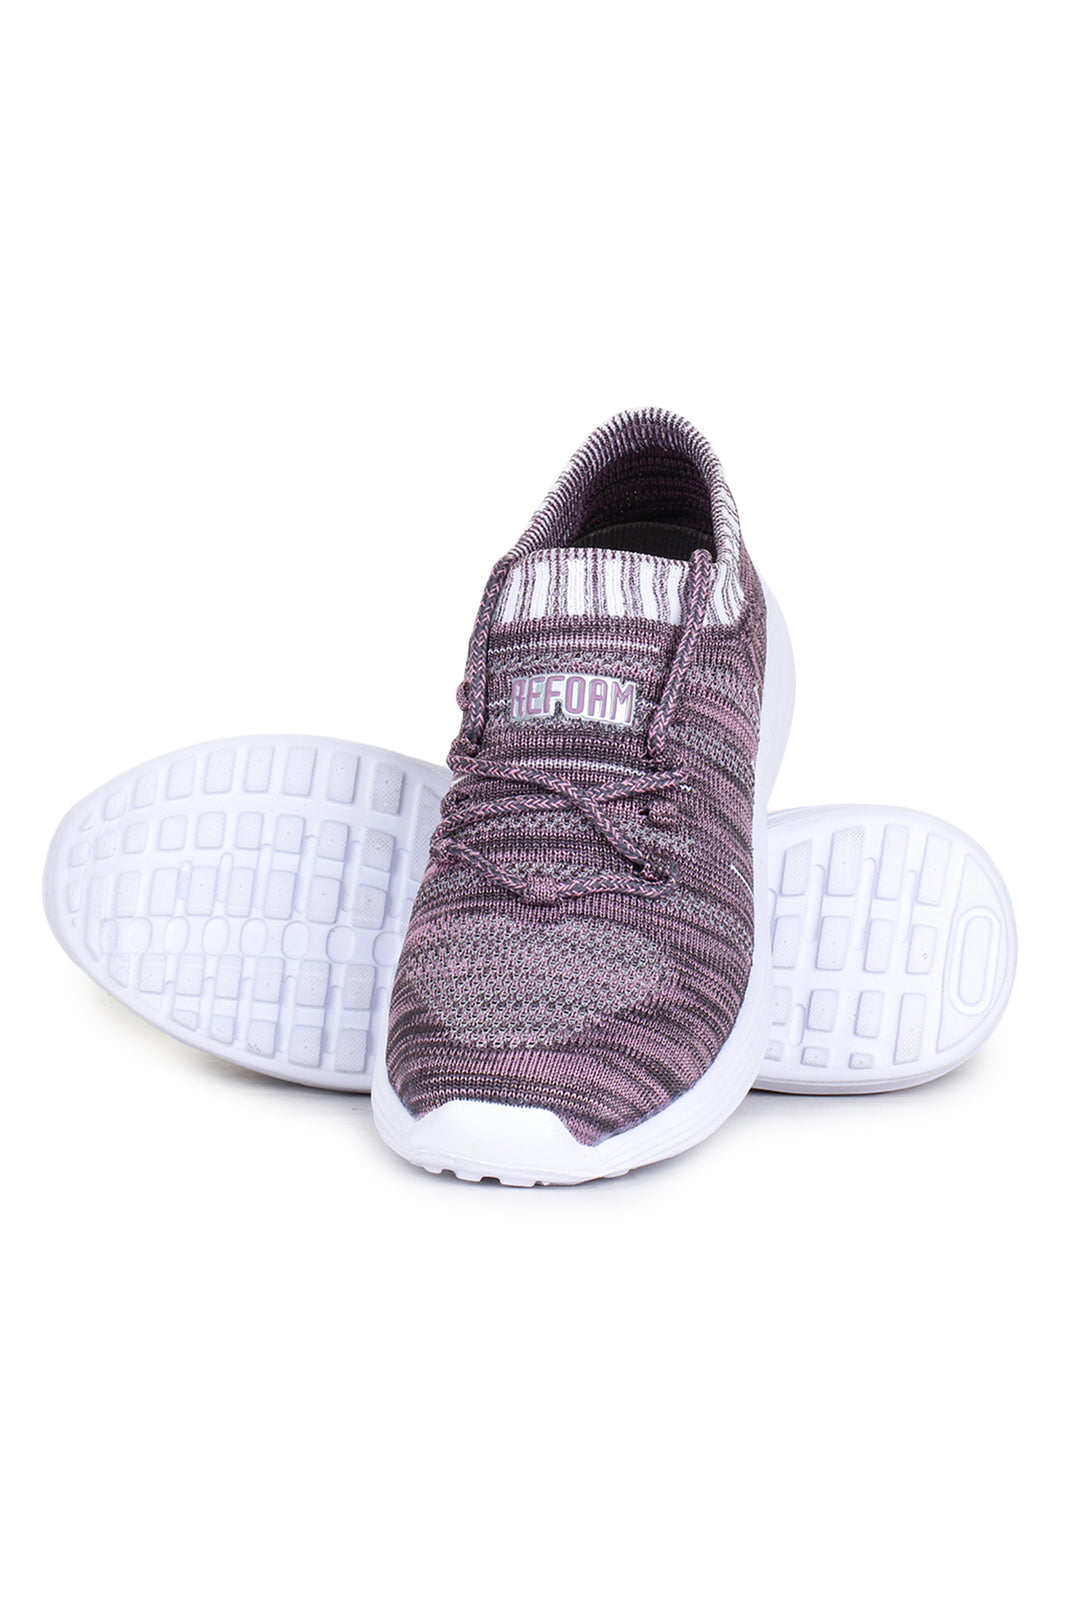 Grey Solid Mesh Lace Up Sports Shoes For Women